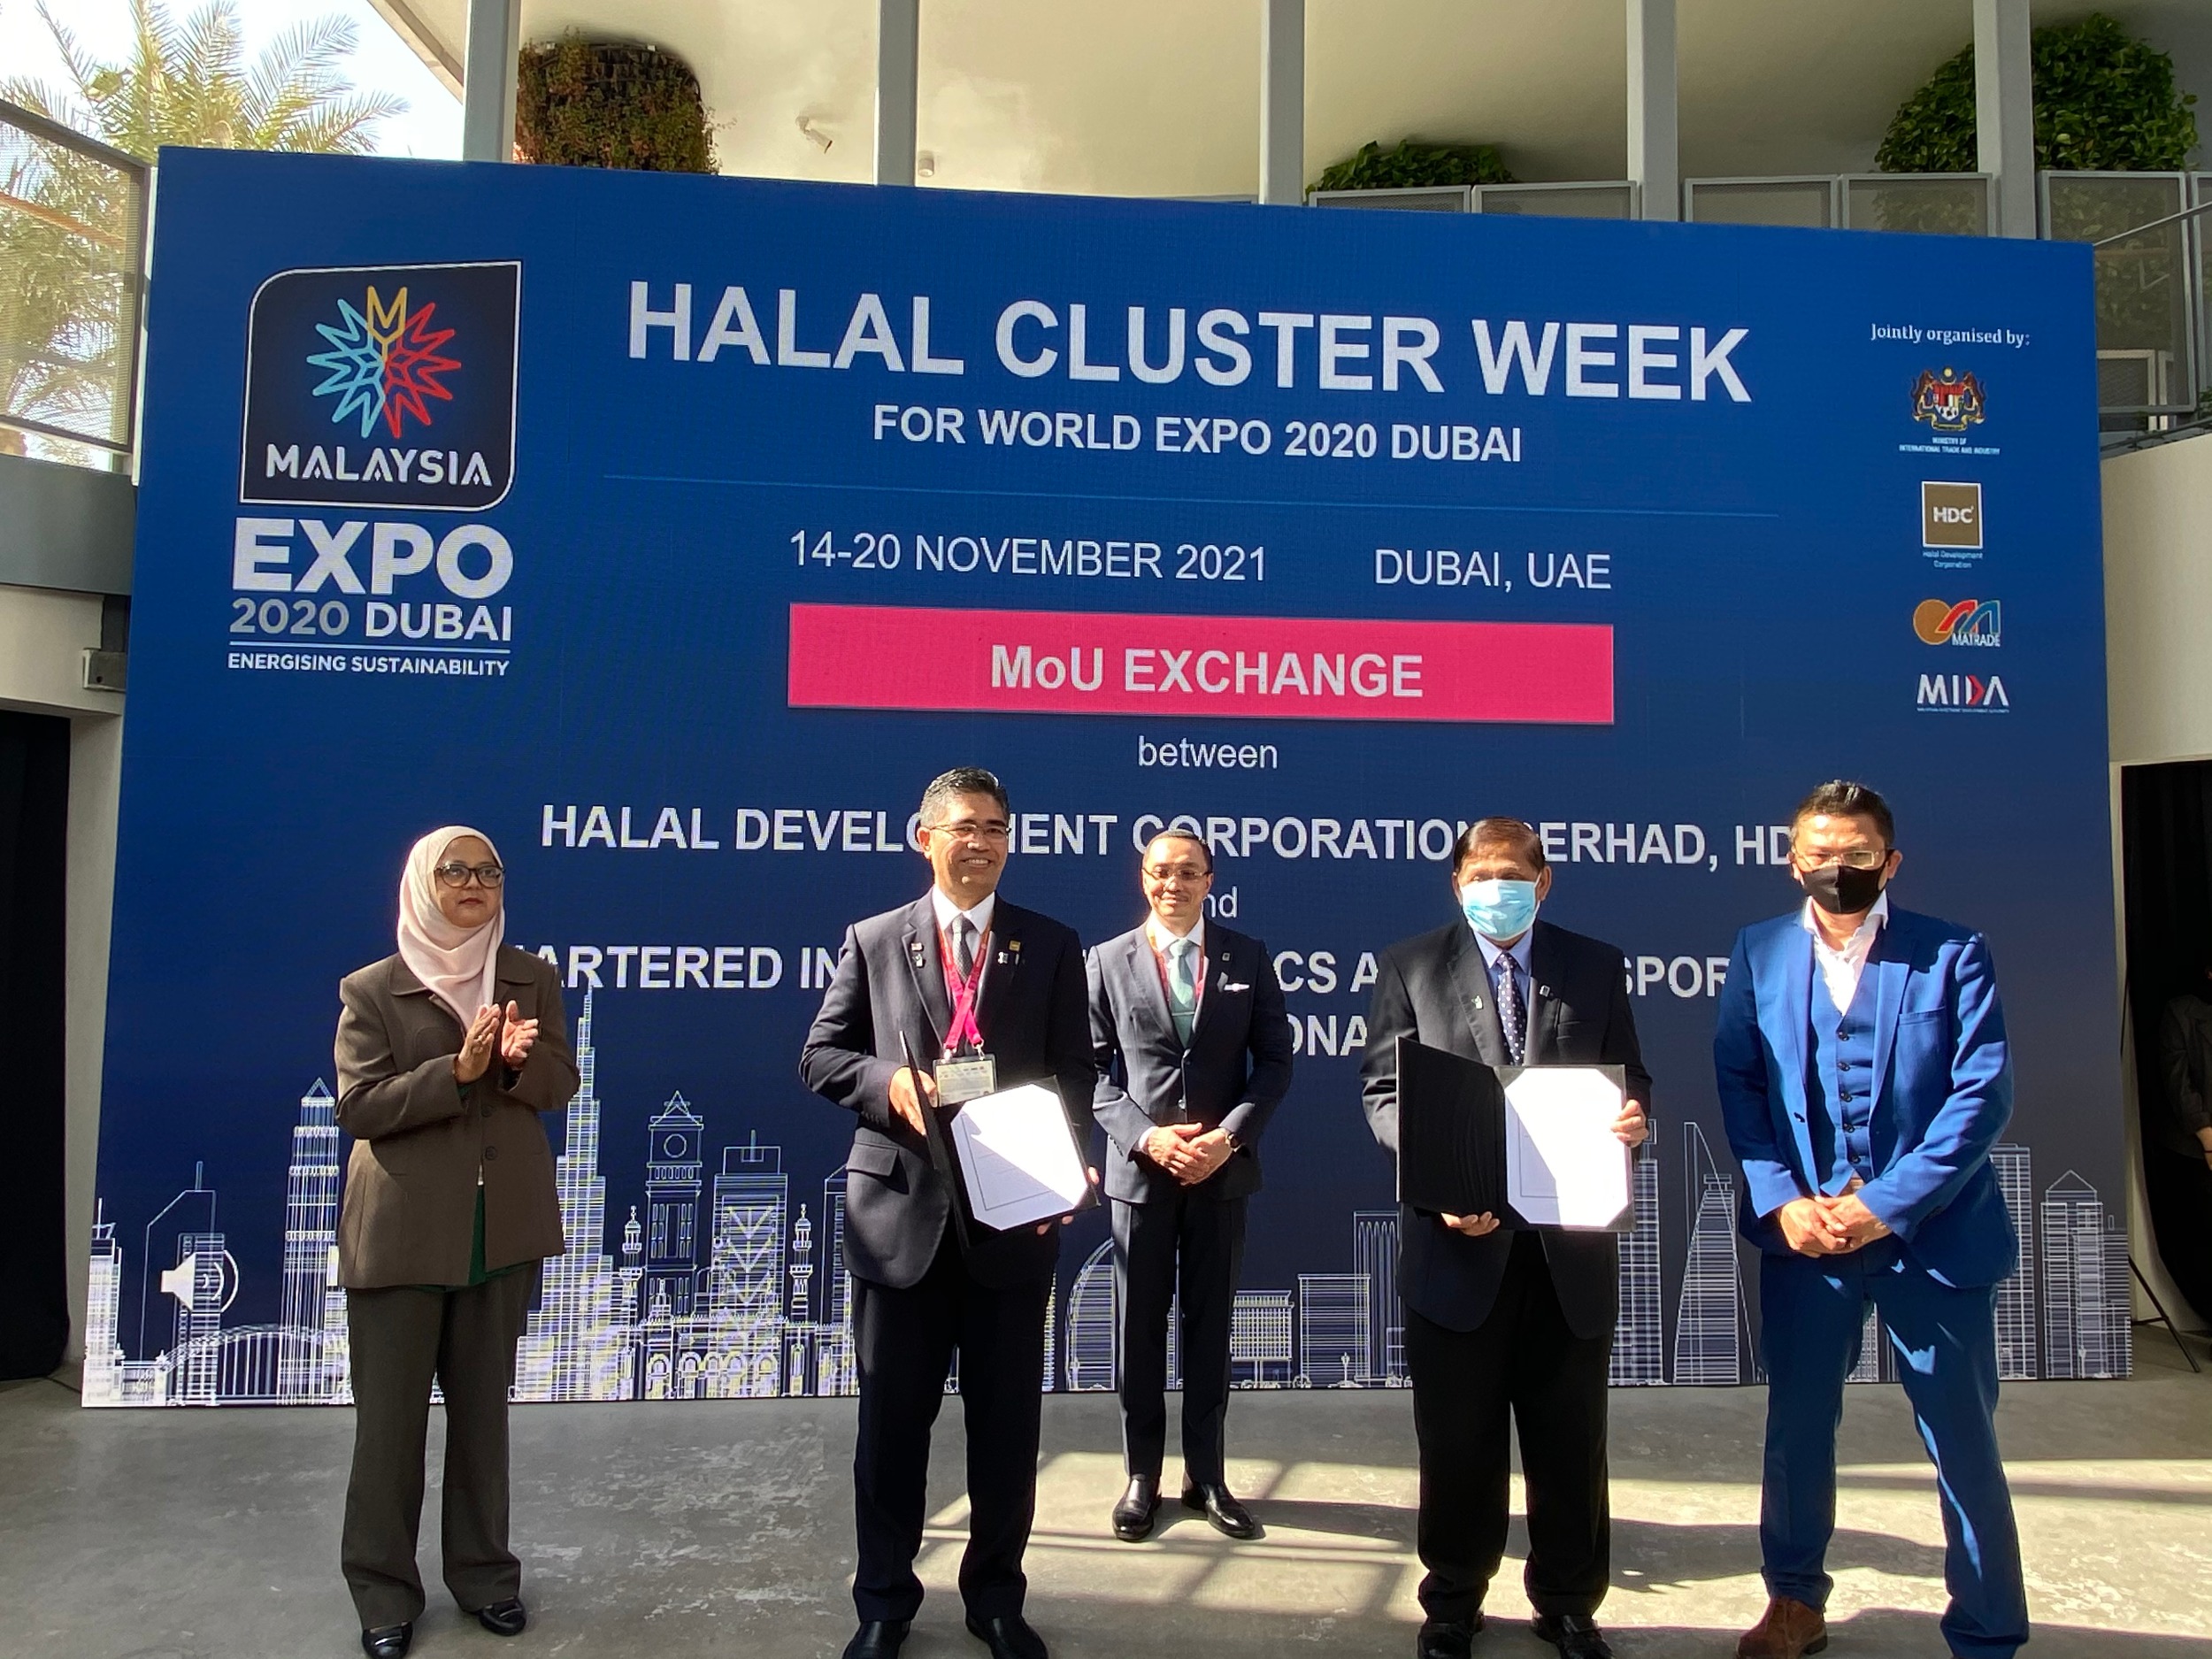 Malaysia to Spearhead and Drive the Halal Economy at the World Expo 2020 – Halal Cluster Week